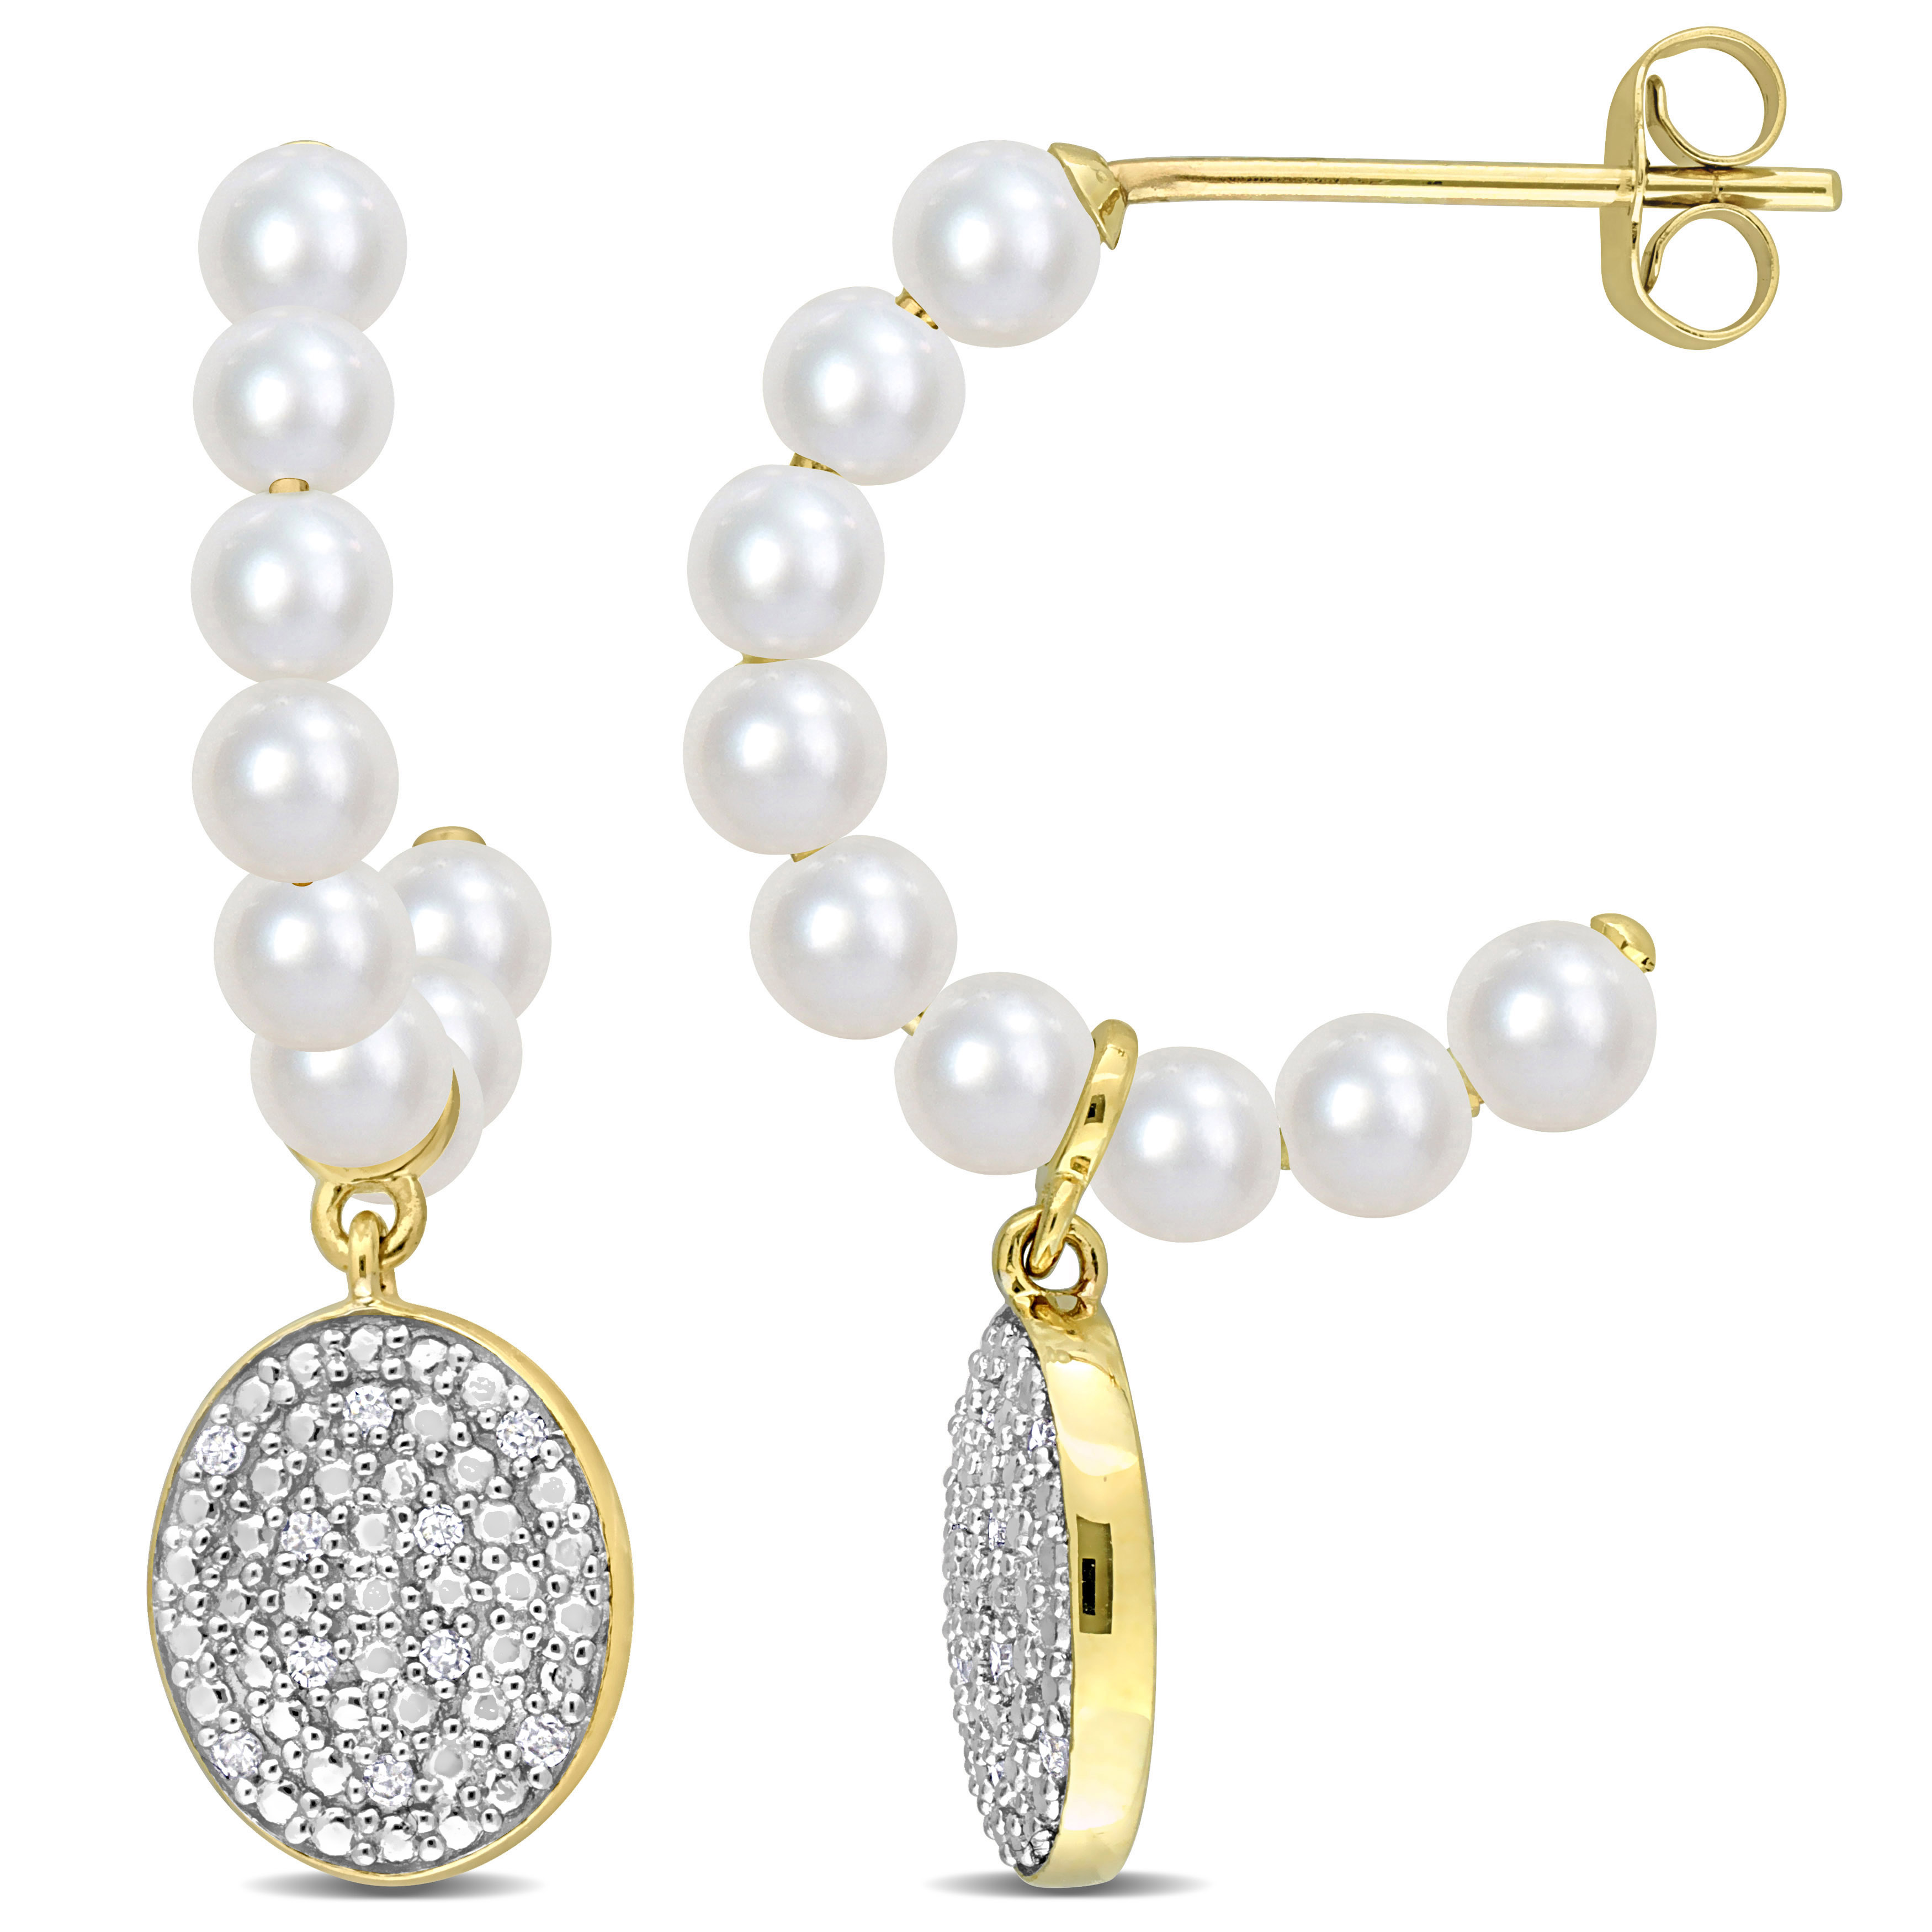 3.5 - 4 MM White Cultured Freshwater Pearl and 1/10 CT TDW Diamond Charm Drop Earrings in 10k Yellow Gold